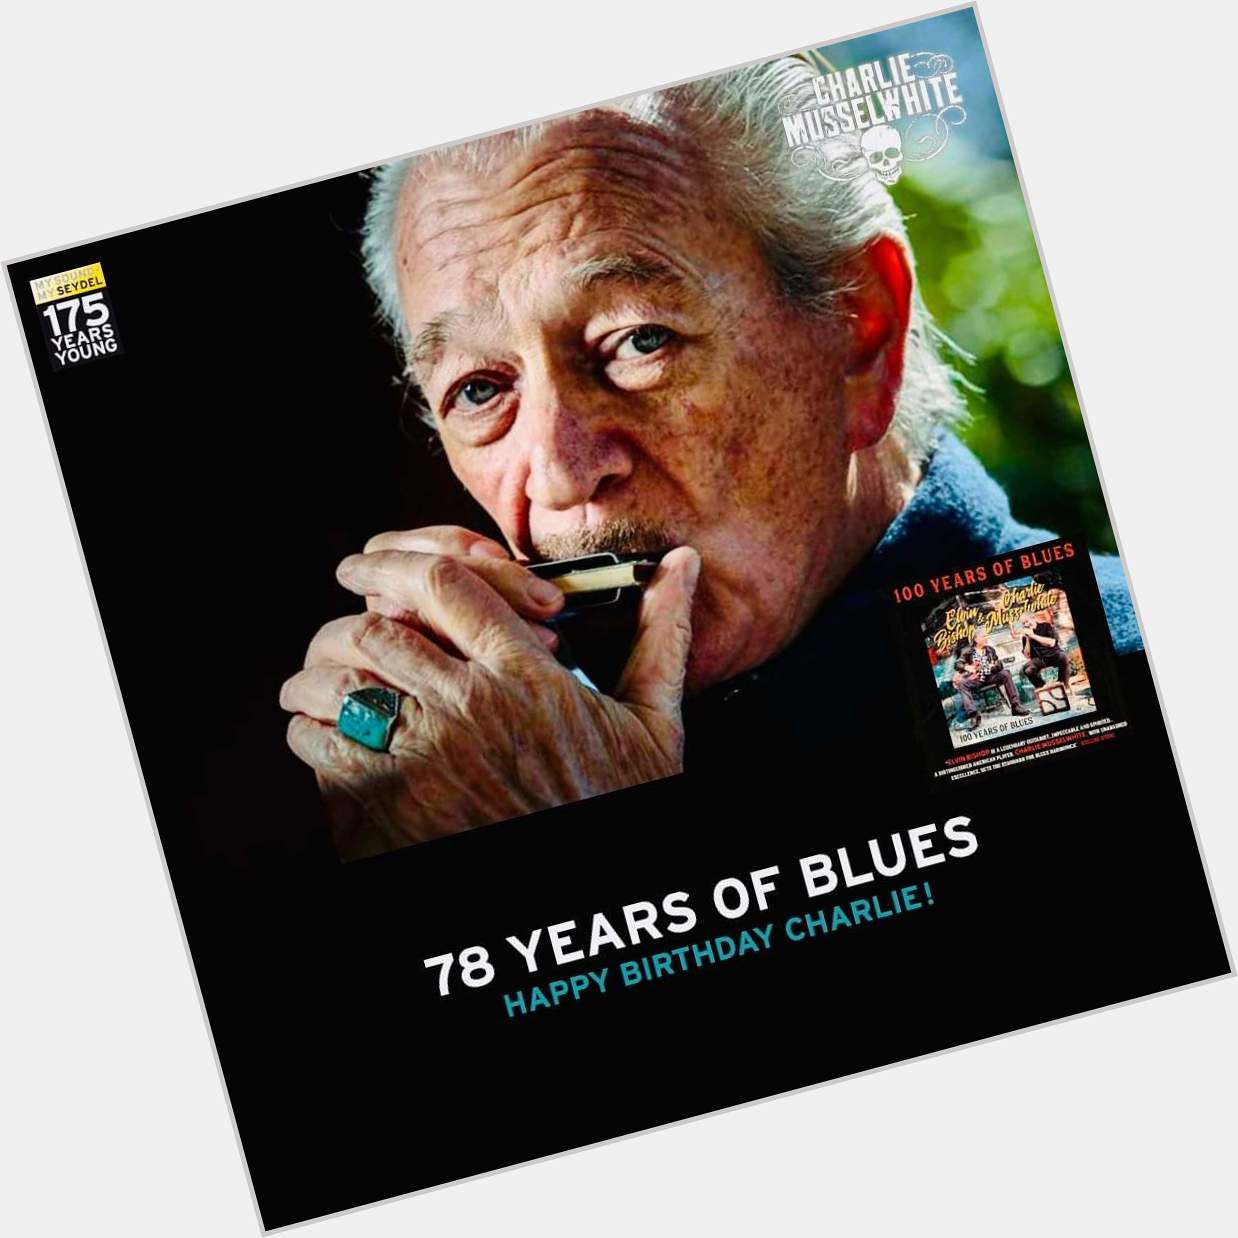 Happy 78th birthday Charlie Musselwhite. World great harmonica player and true friend of Norway 